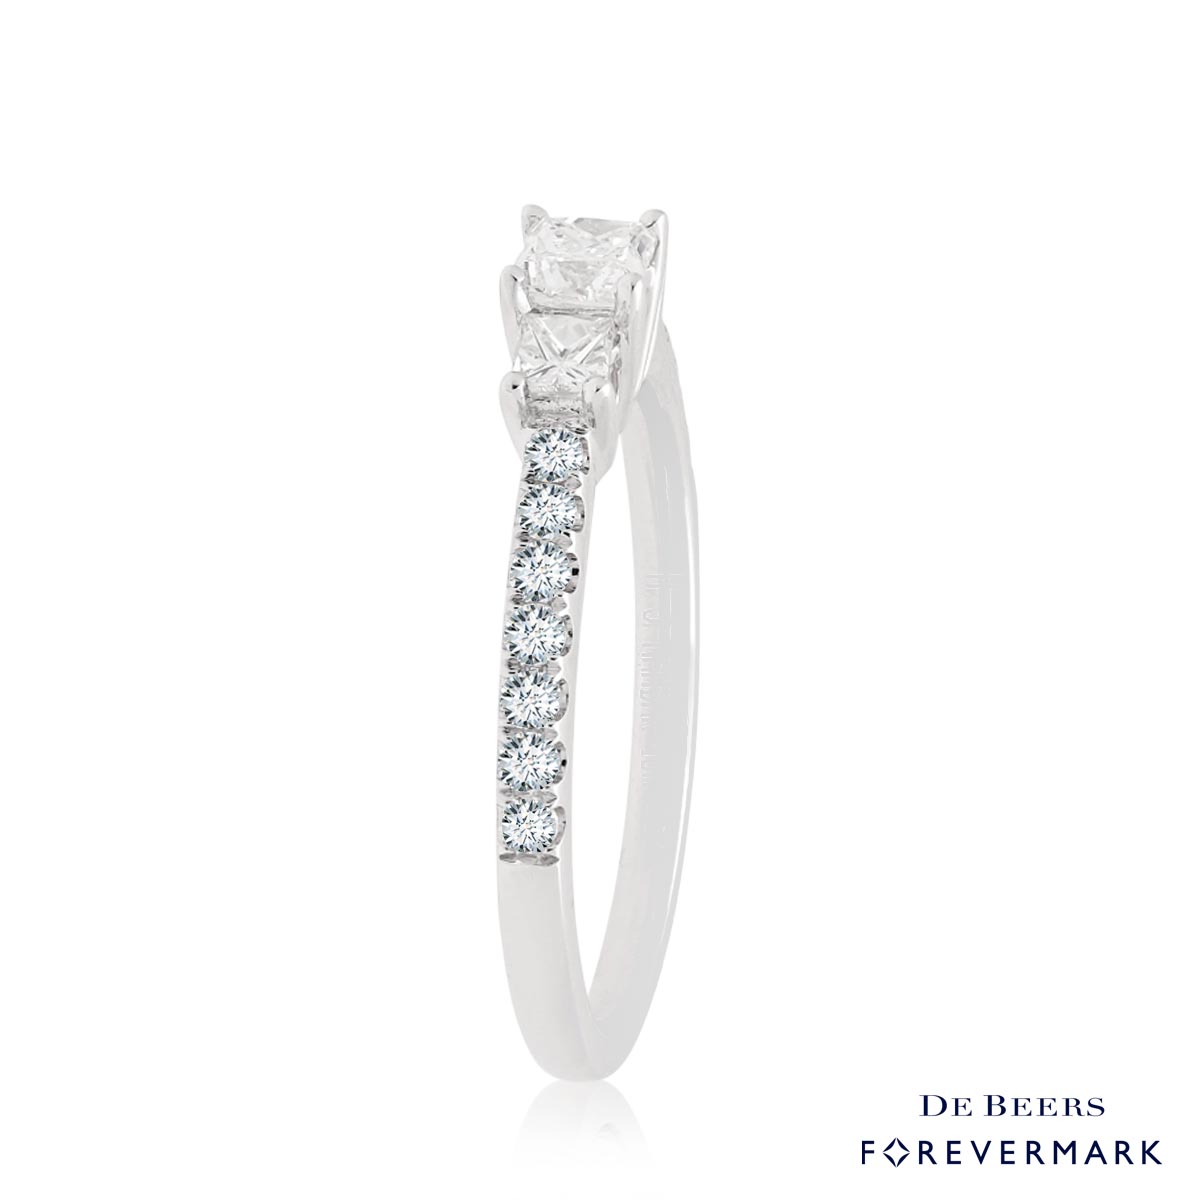 De Beers Forevermark Three Stone Diamond Ring in 18kt White Gold (5/8ct tw)